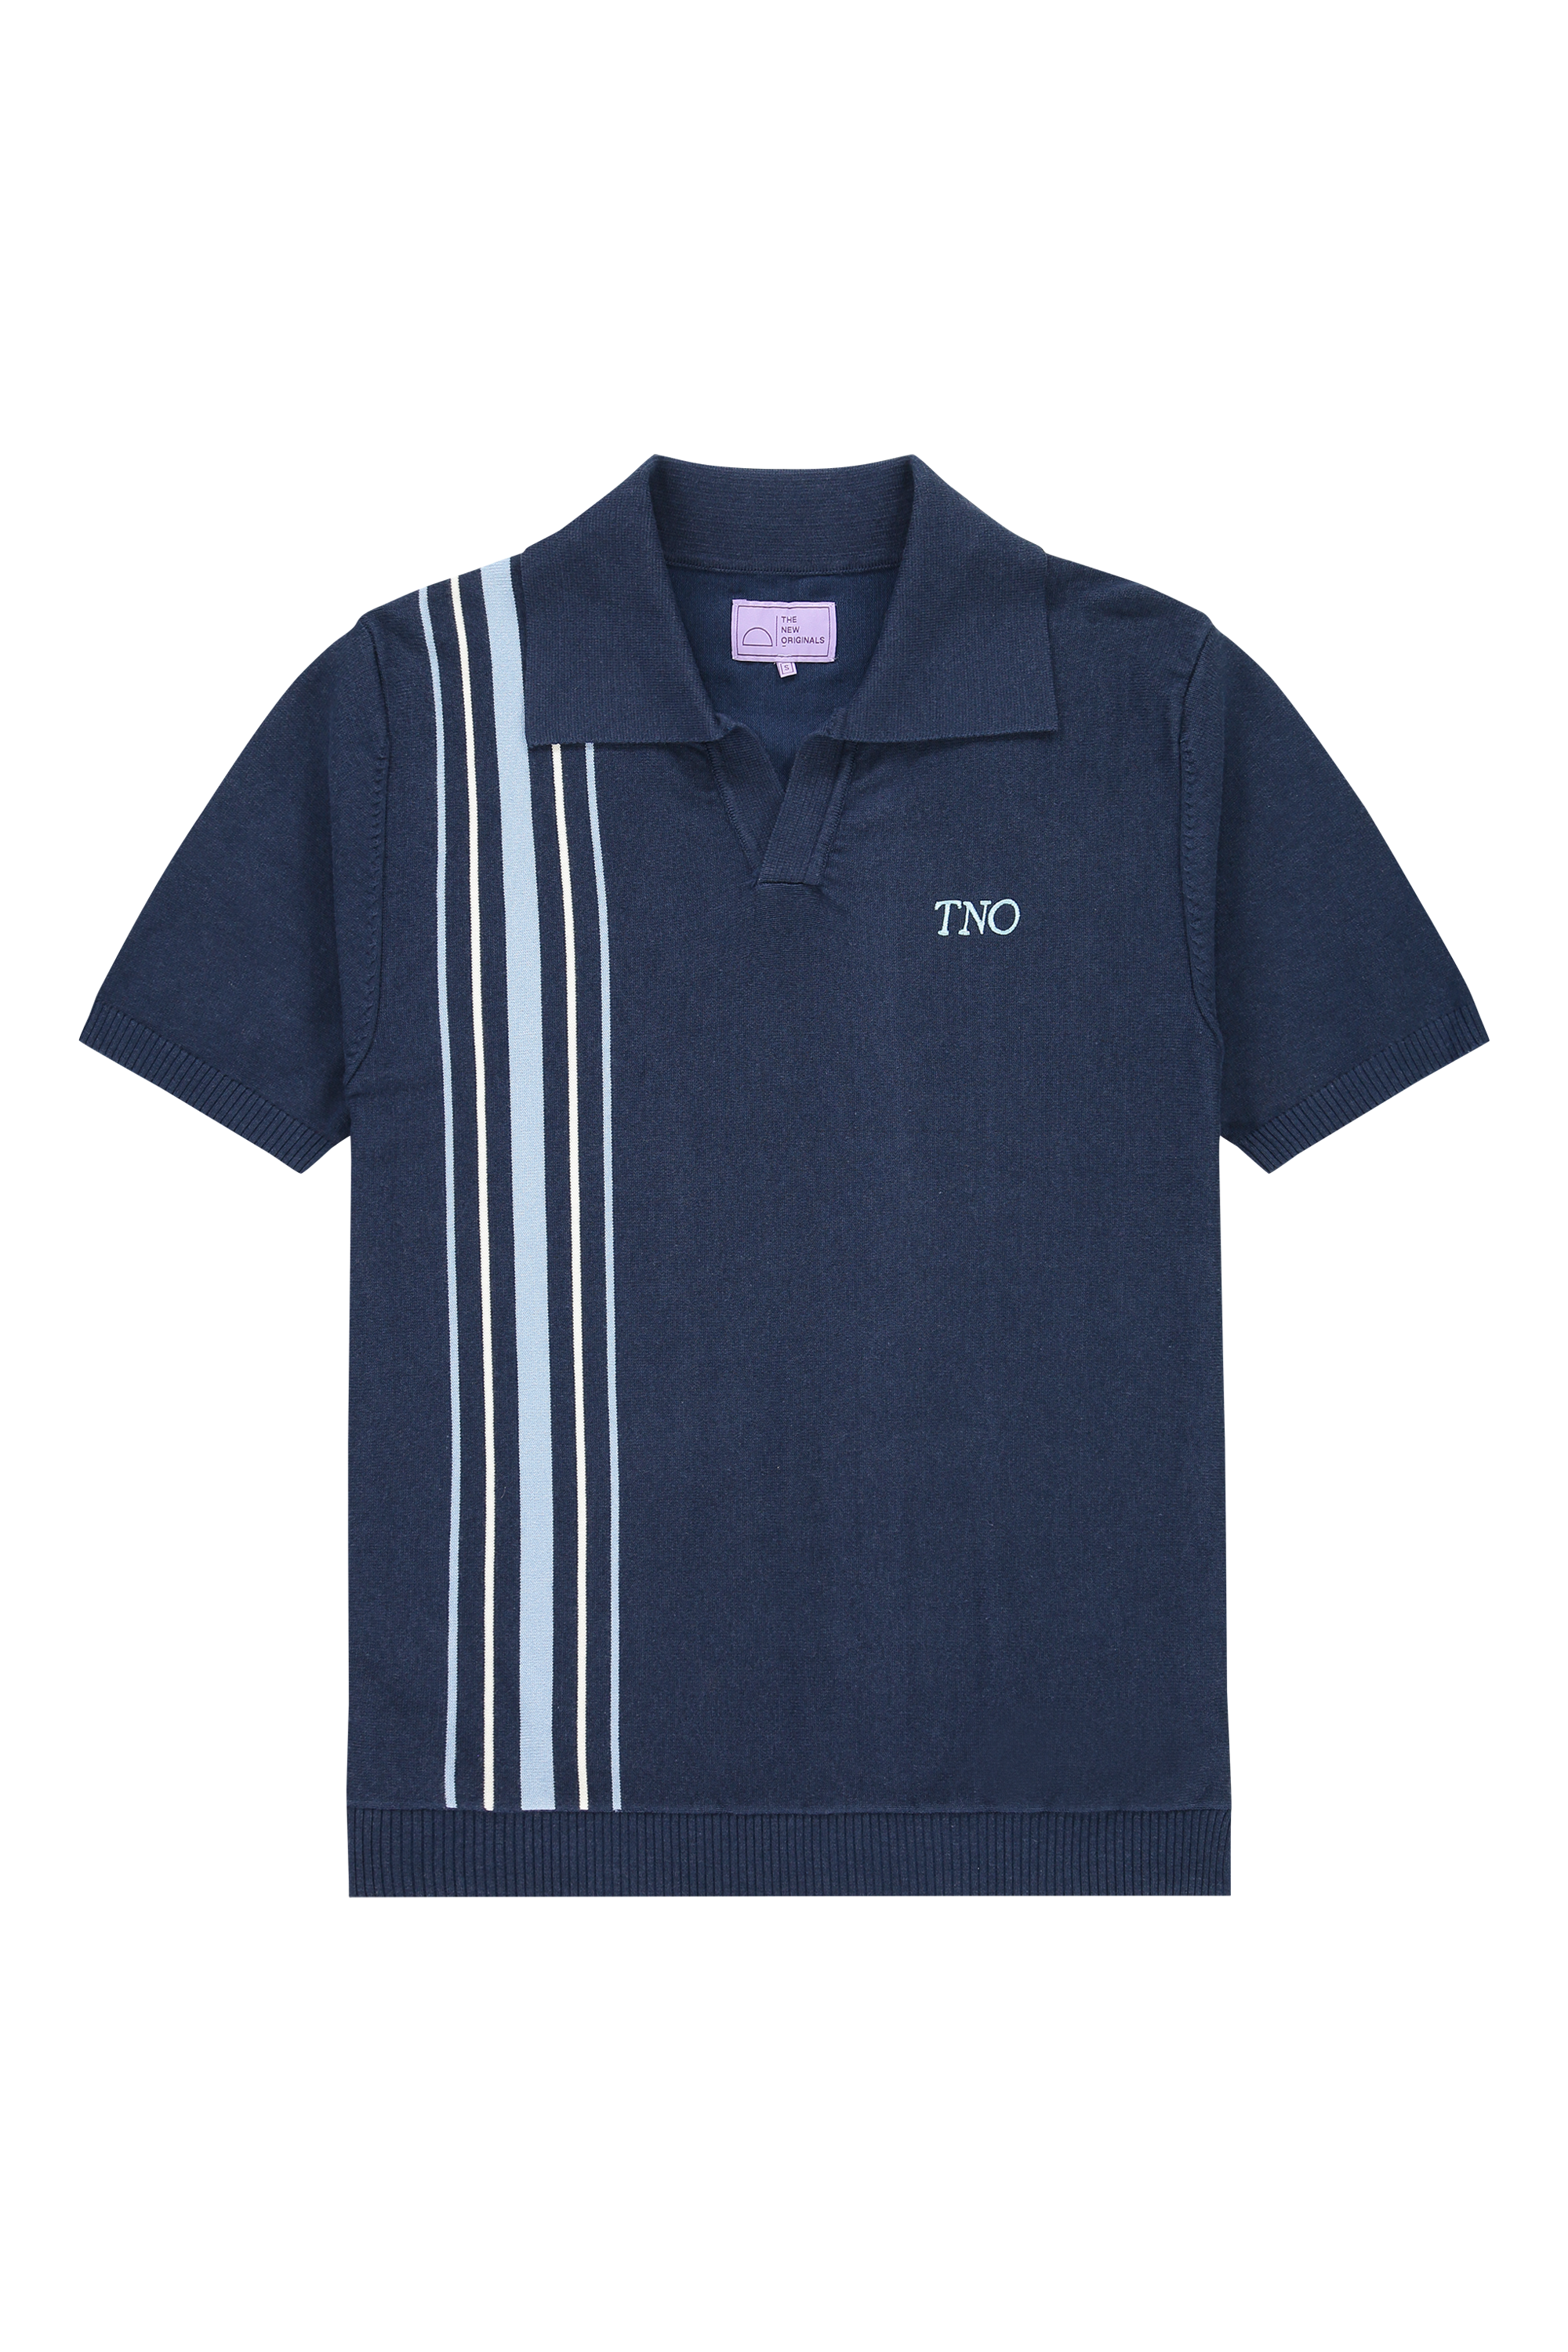 products-underlinepolo_blue_front-png